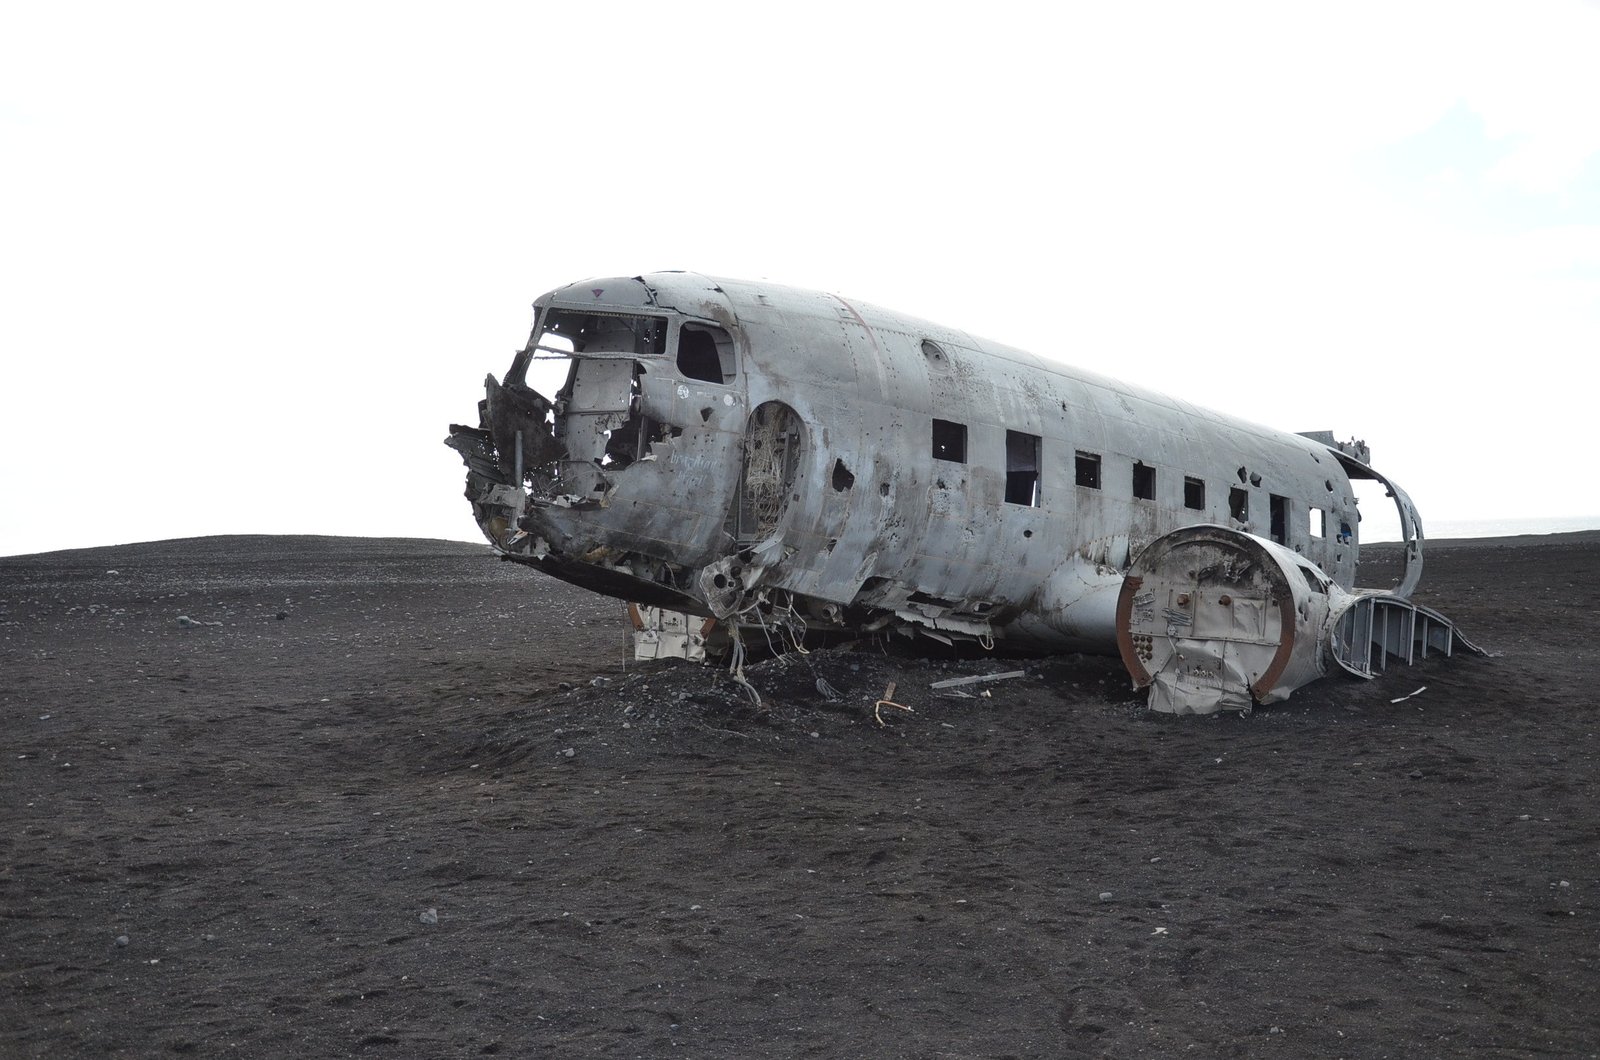 An airplane fuselage, the parts left after a plane crash